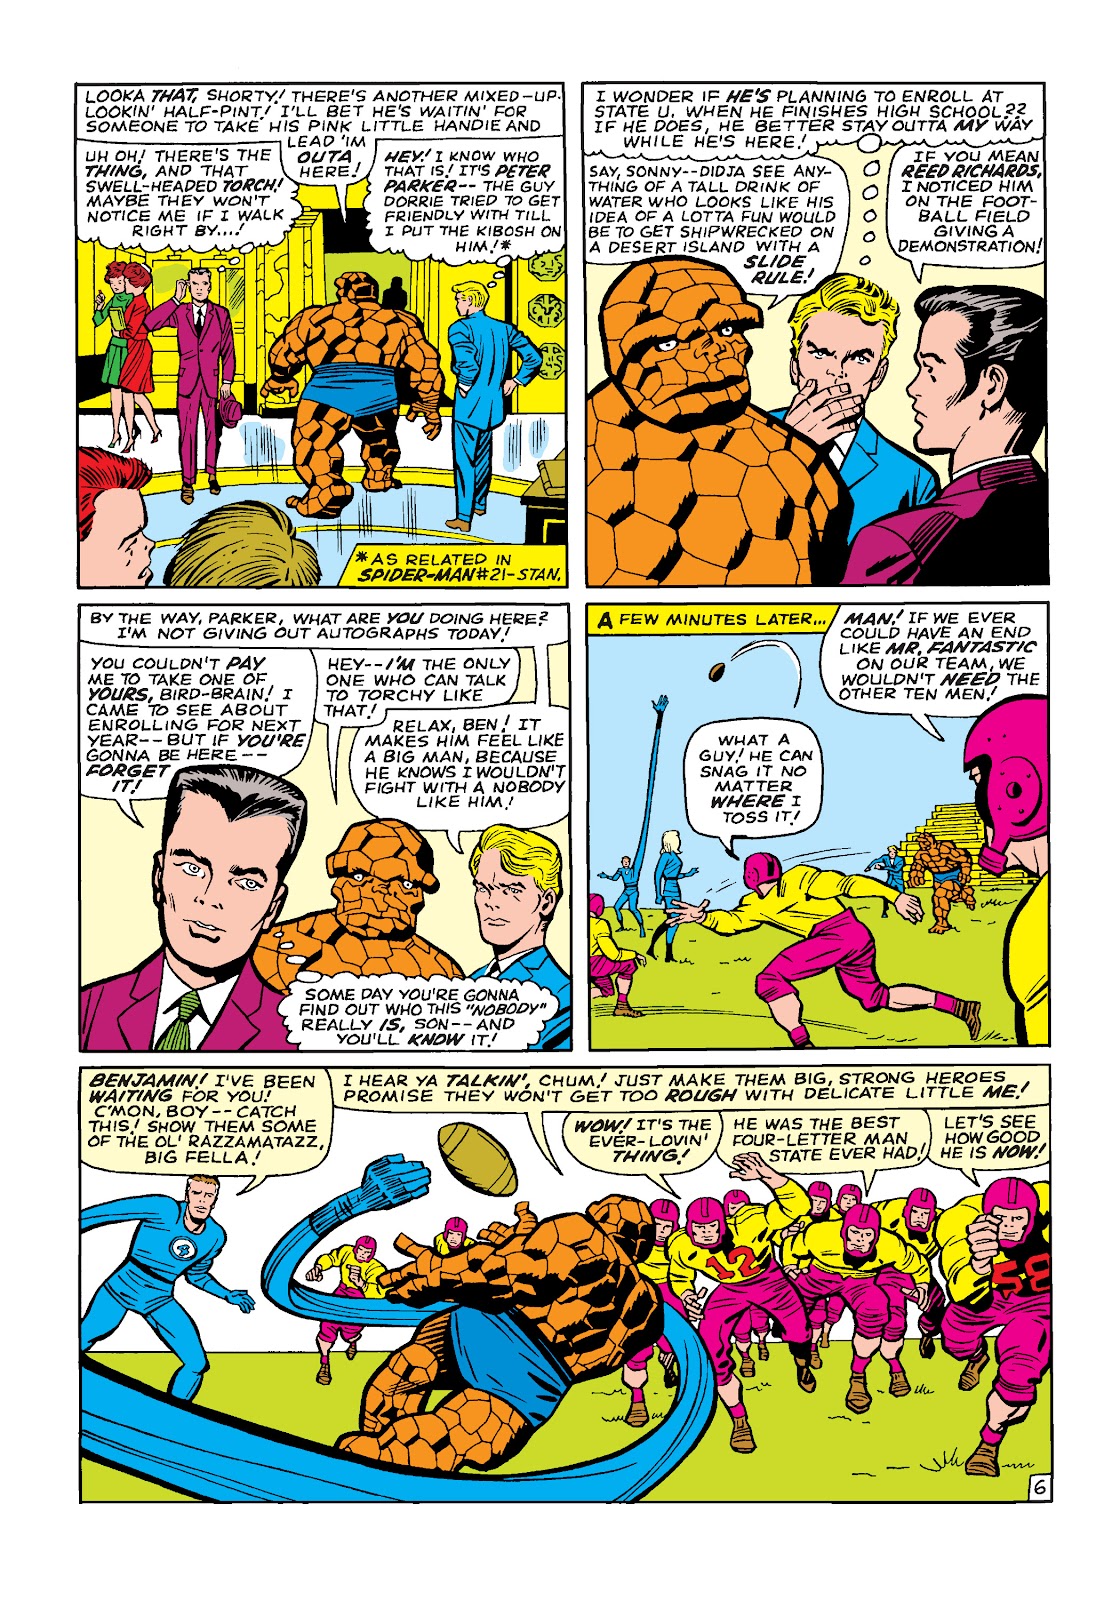 Read online Marvel Masterworks: The Fantastic Four comic - Issue # TPB 4 (Part 2) - 50